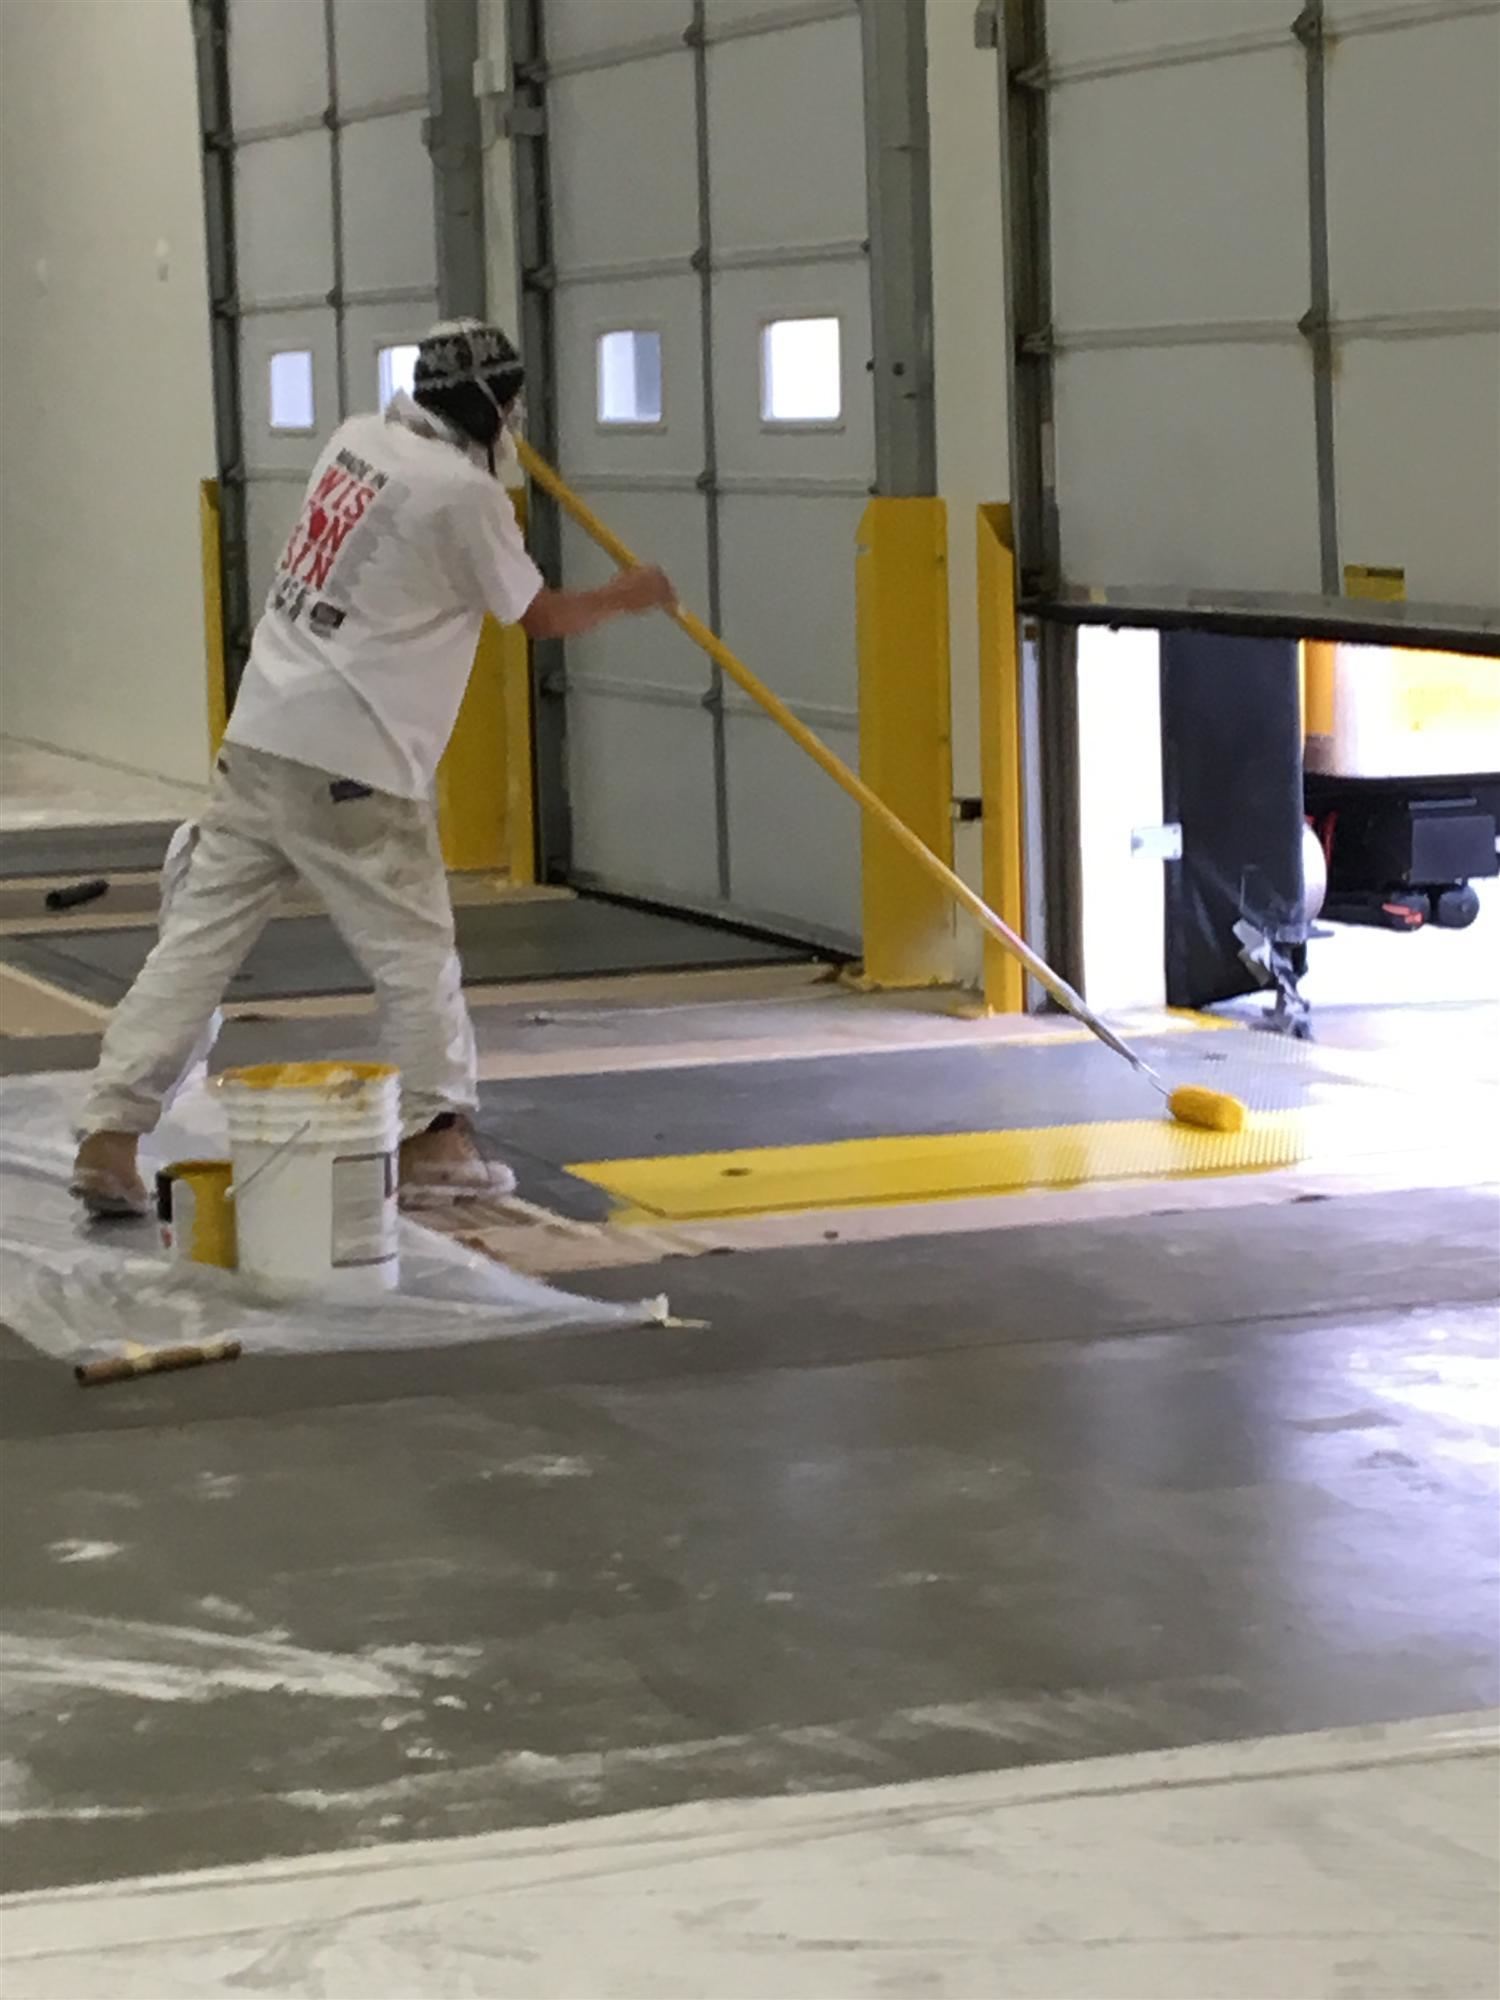 K2 painting contractor hard at work painting a loading dock safety yellow